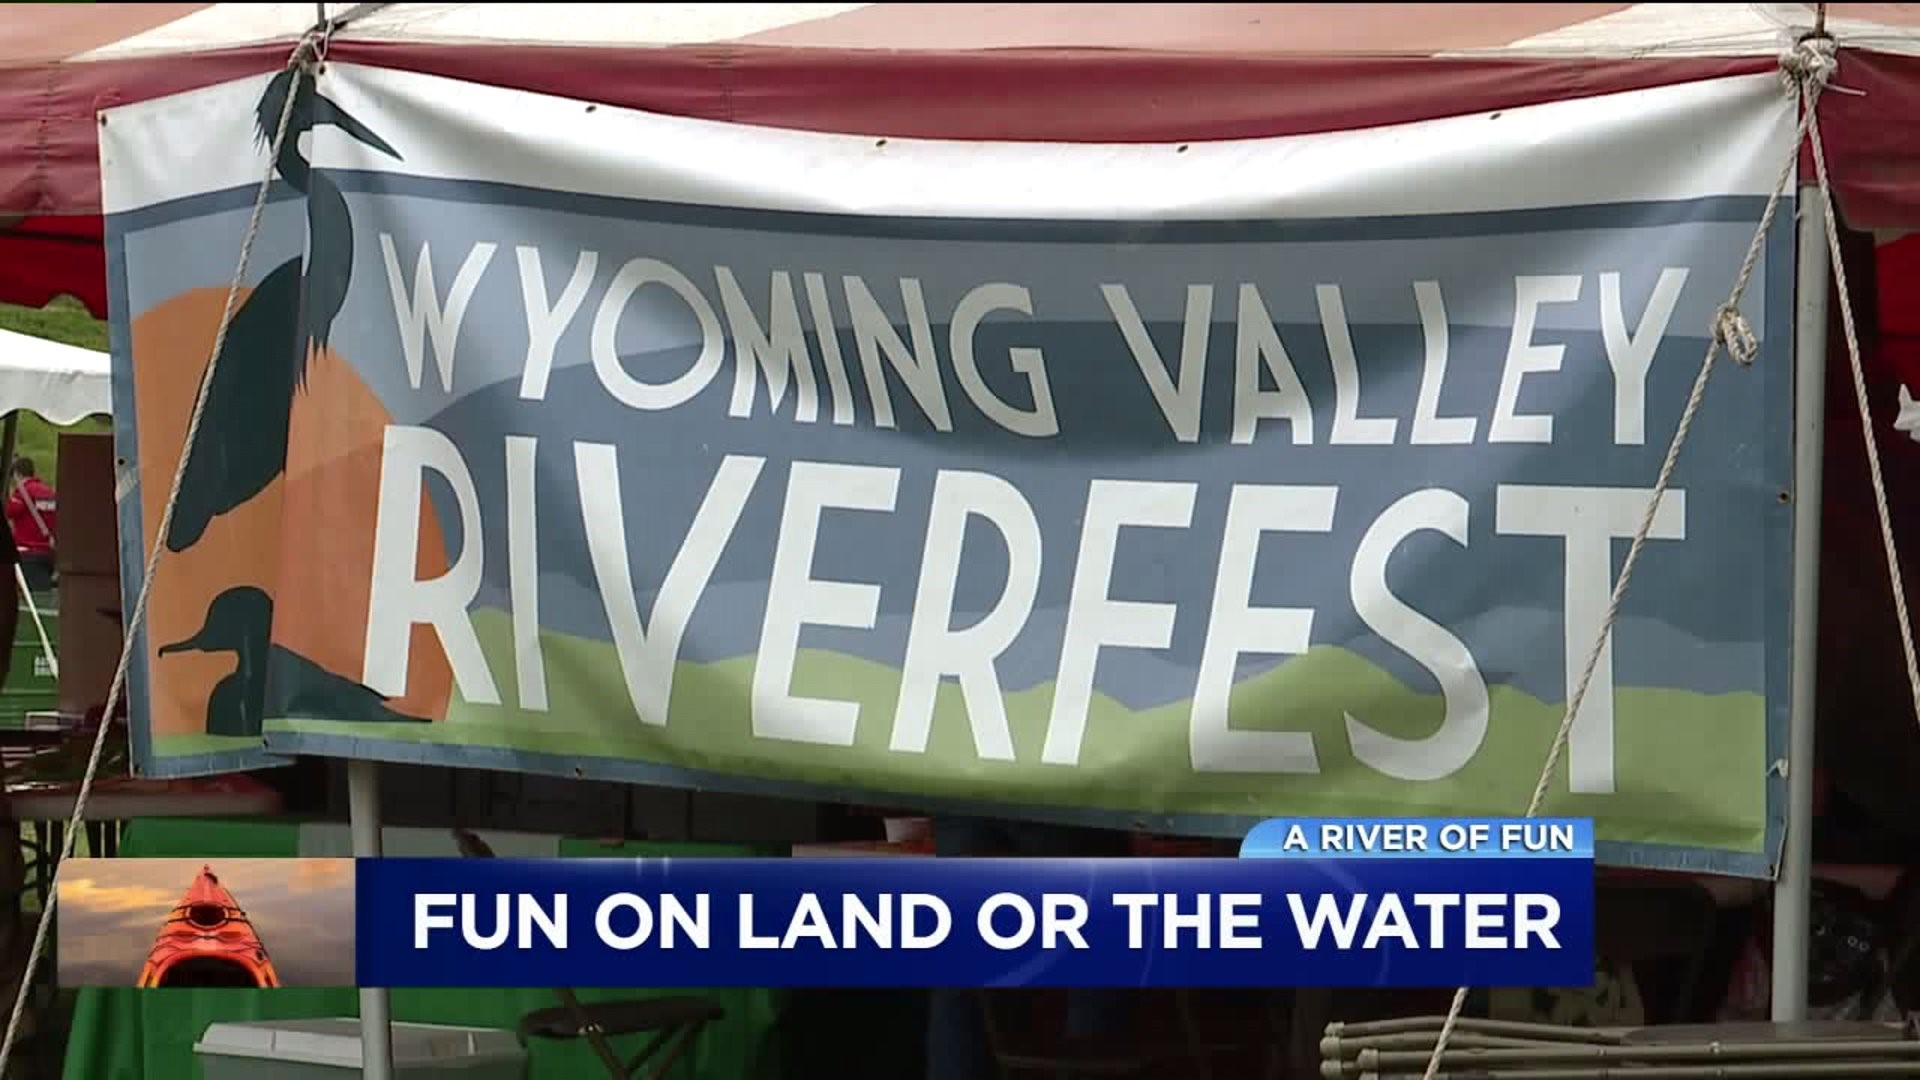 A River of Run: Wyoming Valley RiverFest 2019